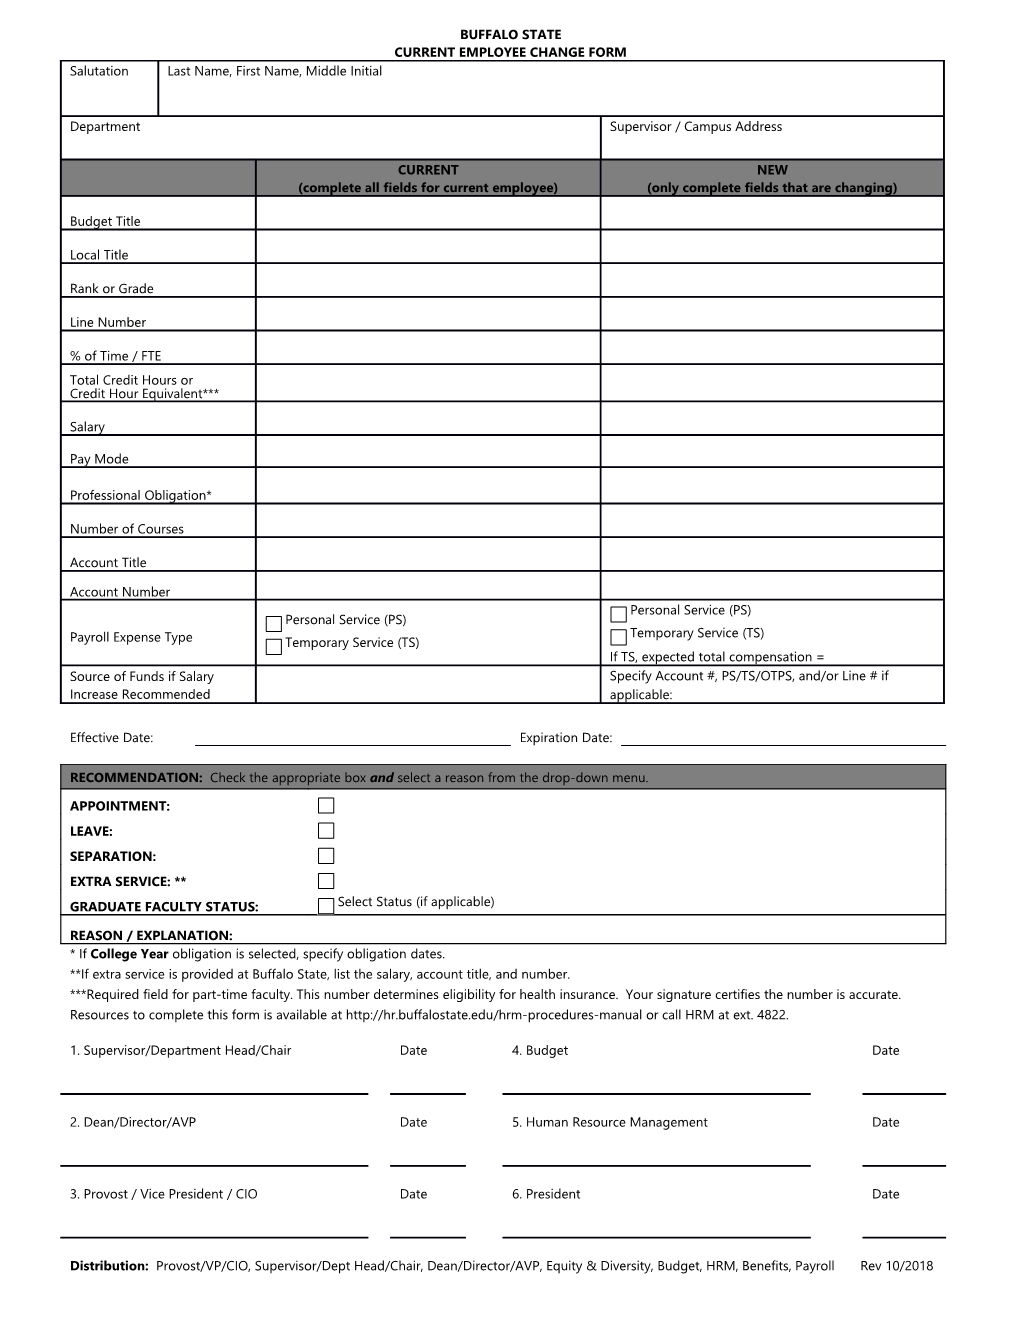 Current Employee Change Form (MS Word)